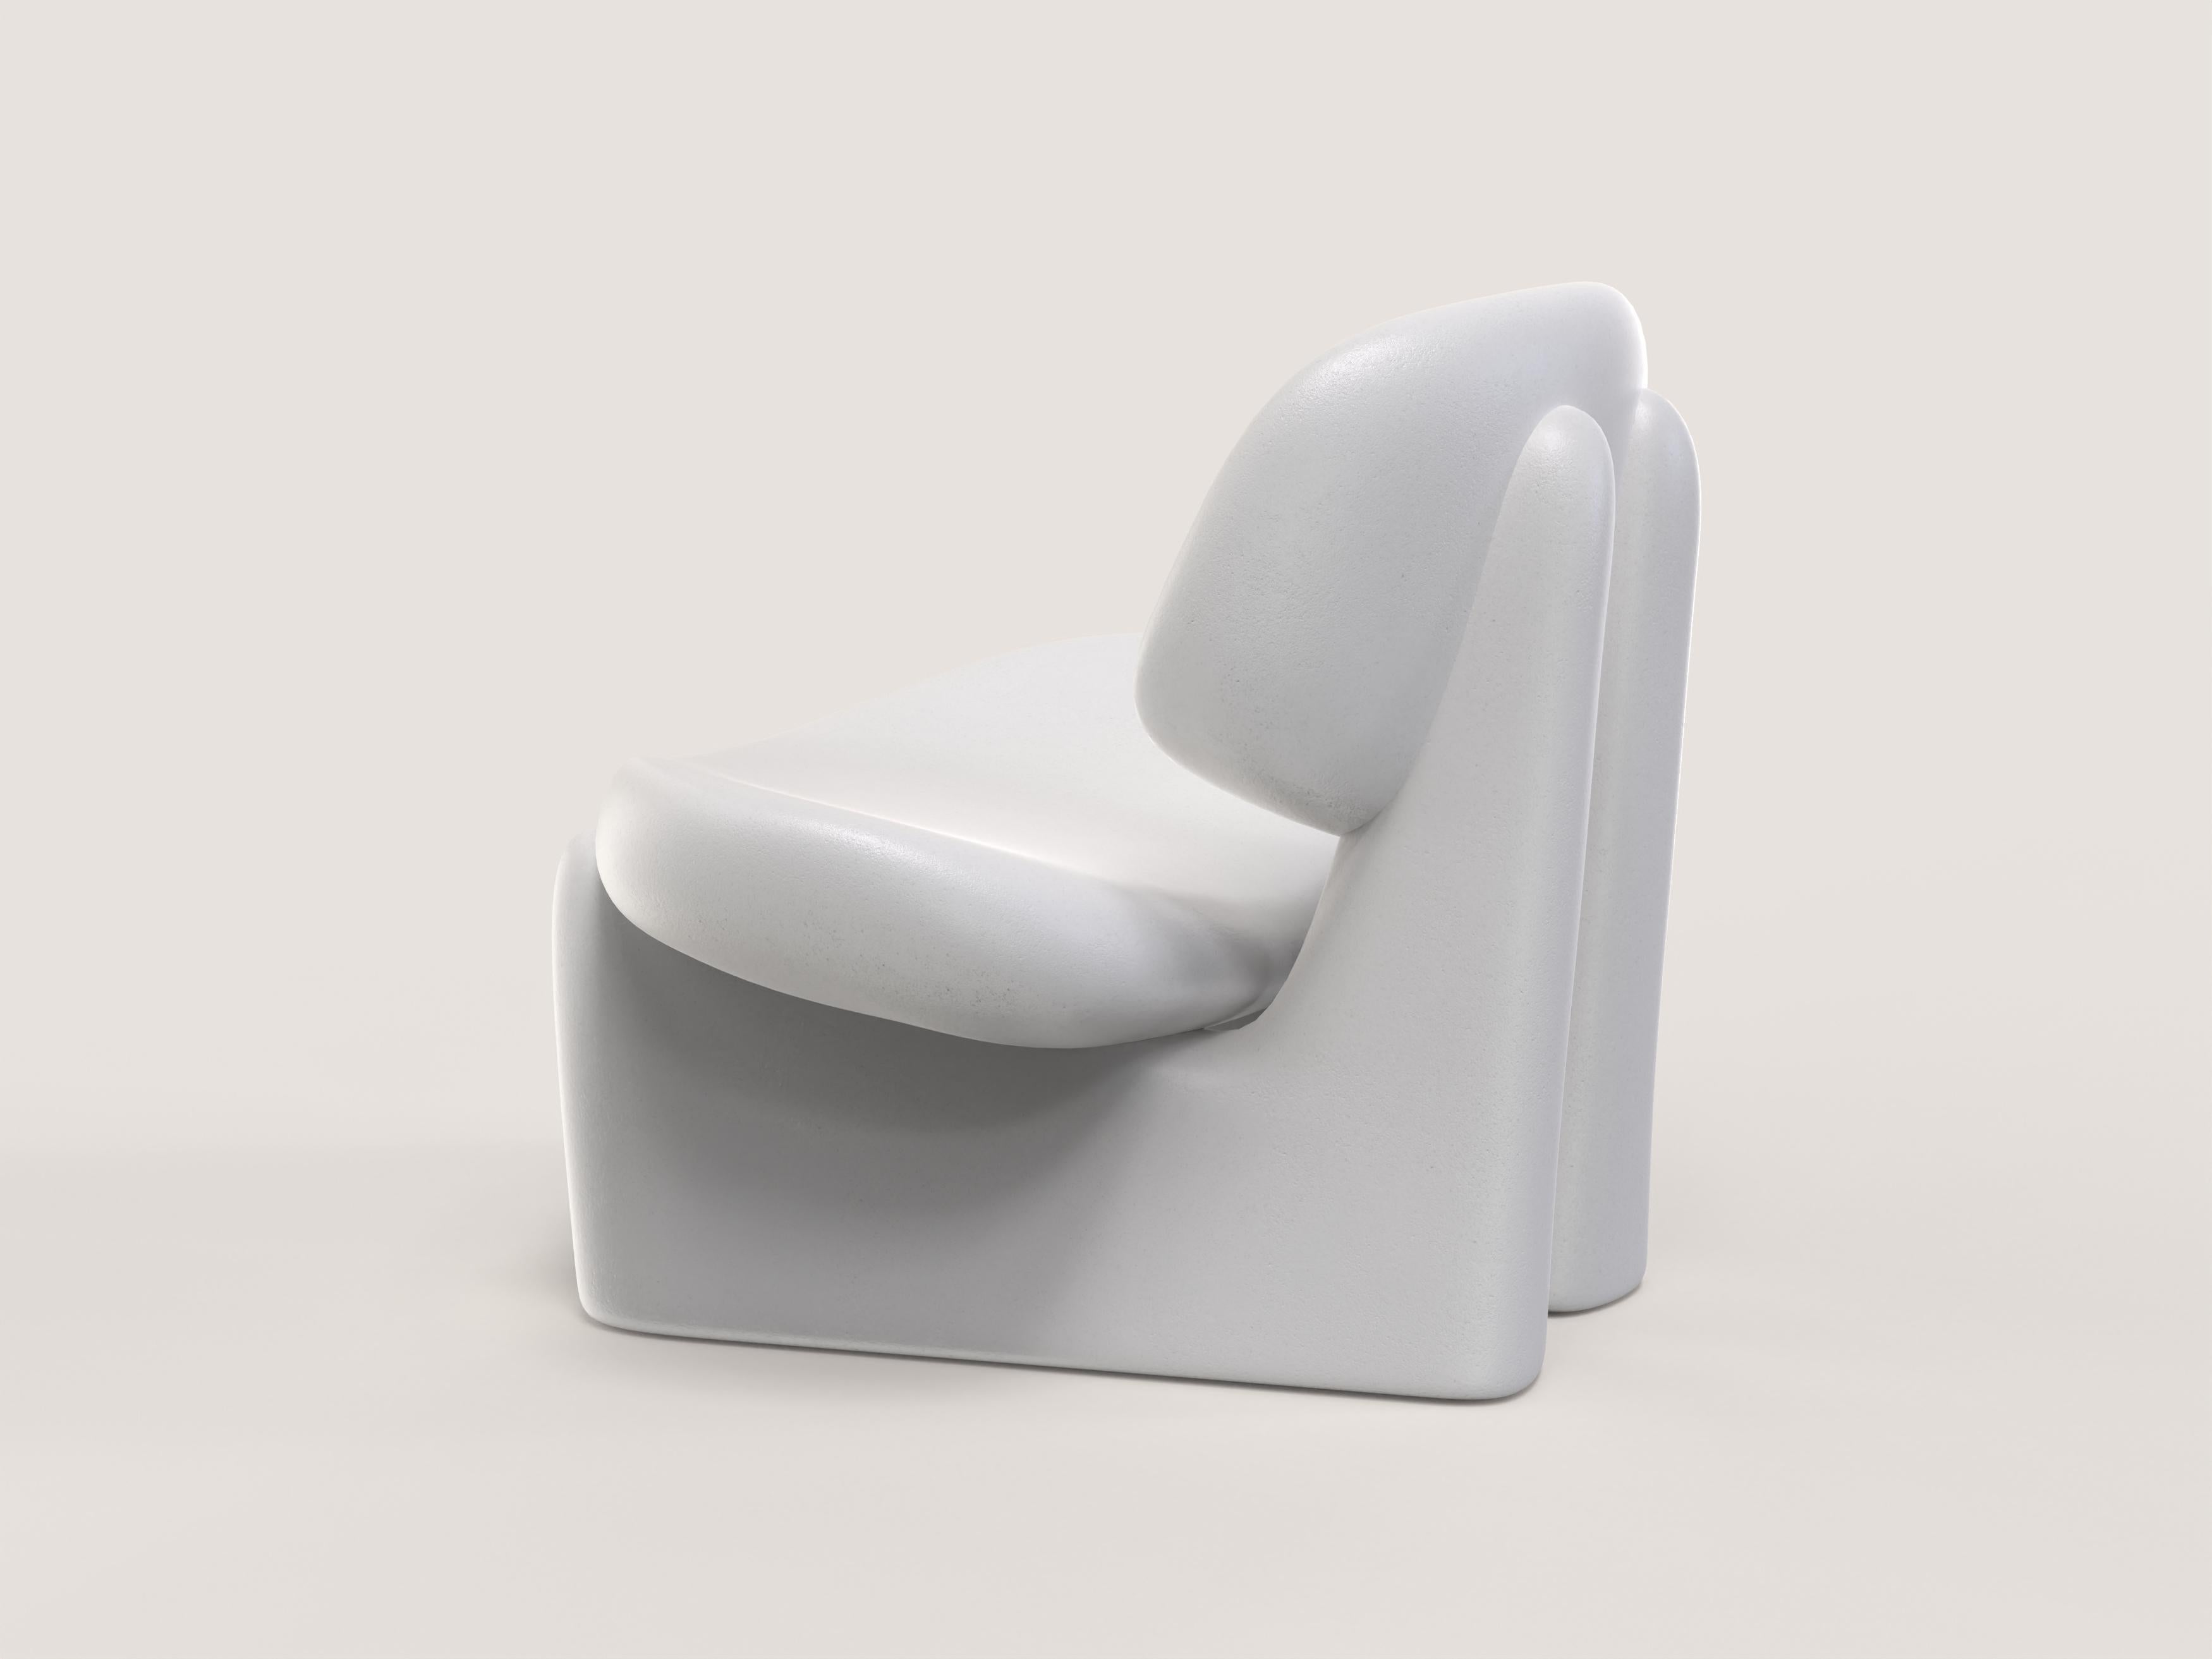 Polystyrene Contemporary Limited Edition Signed Armchair, Pau V1 by Edizione Limitata For Sale